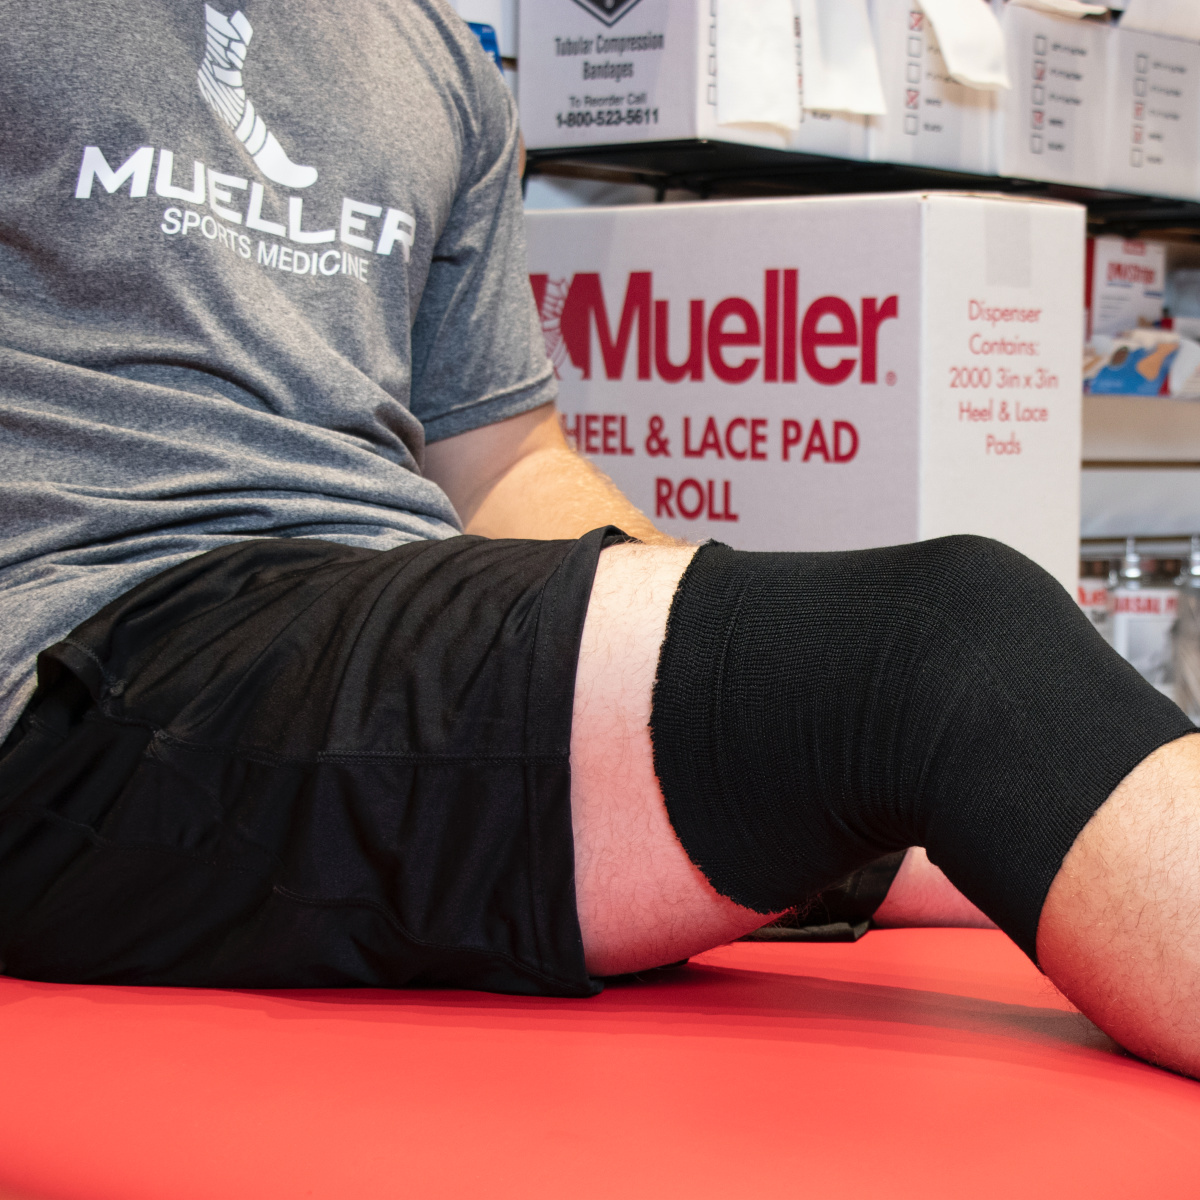 MUELLER SPORTS MEDICINE ANNOUNCES EXCLUSIVE PARTNERSHIP WITH PRO ORTHOPEDIC DEVICES